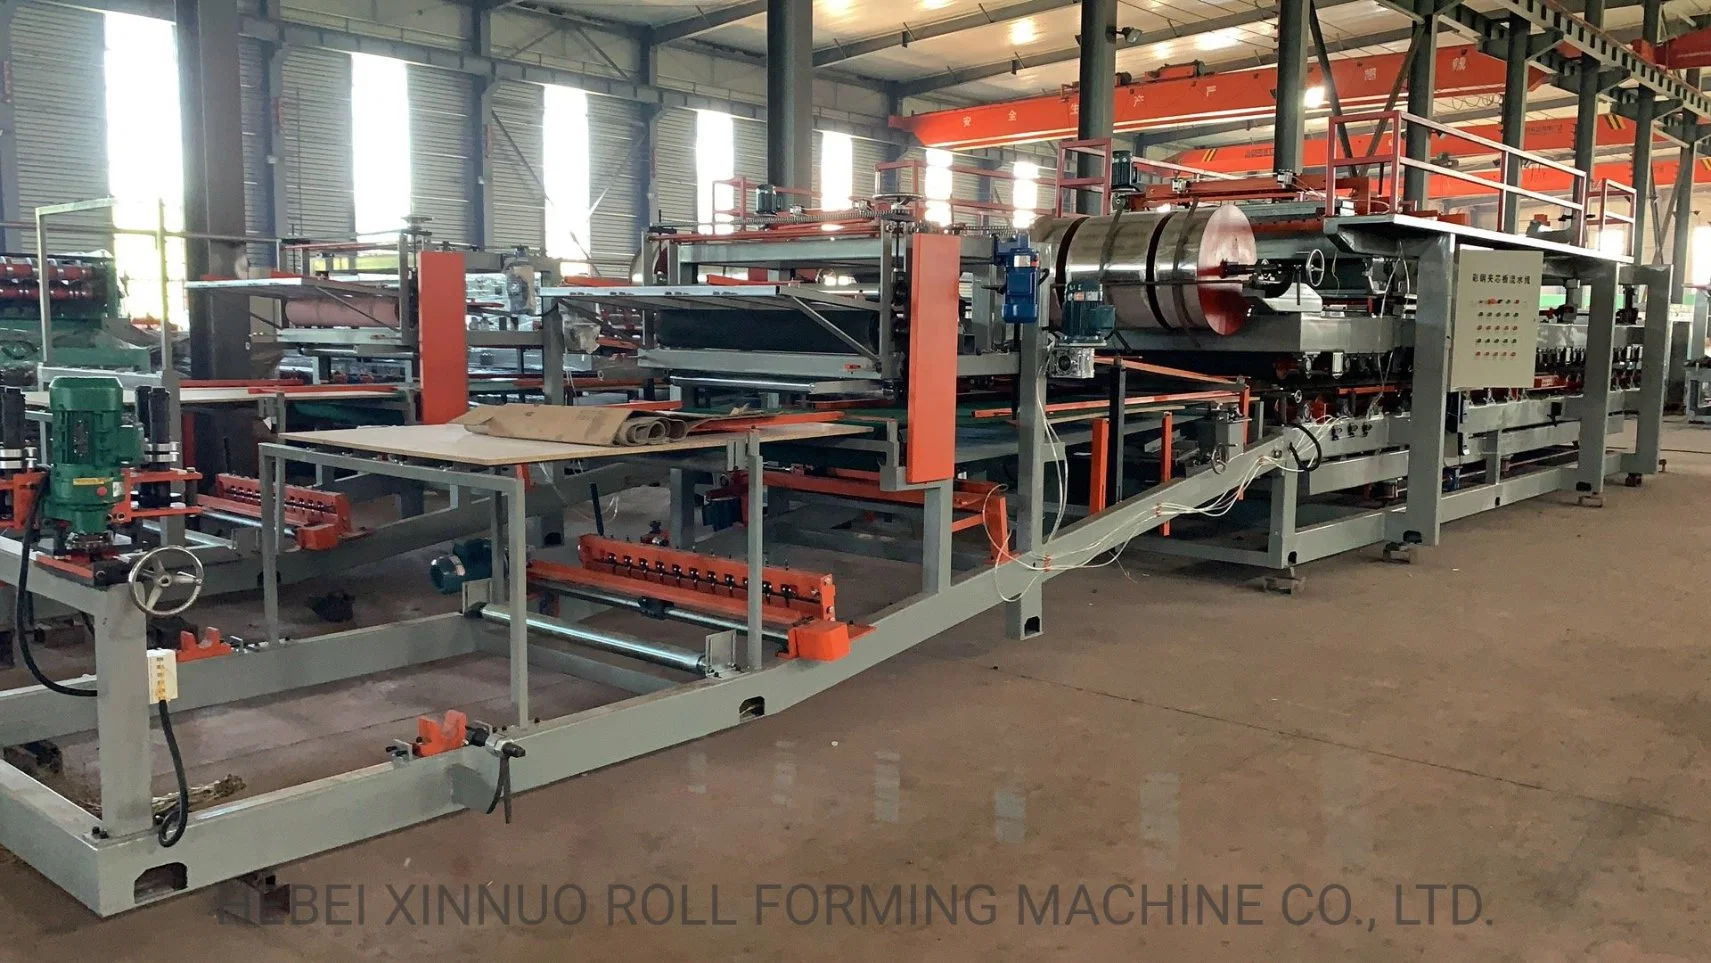 EPS and Rock Wool Roof and Cladding Use Sandwich Panel Production Line